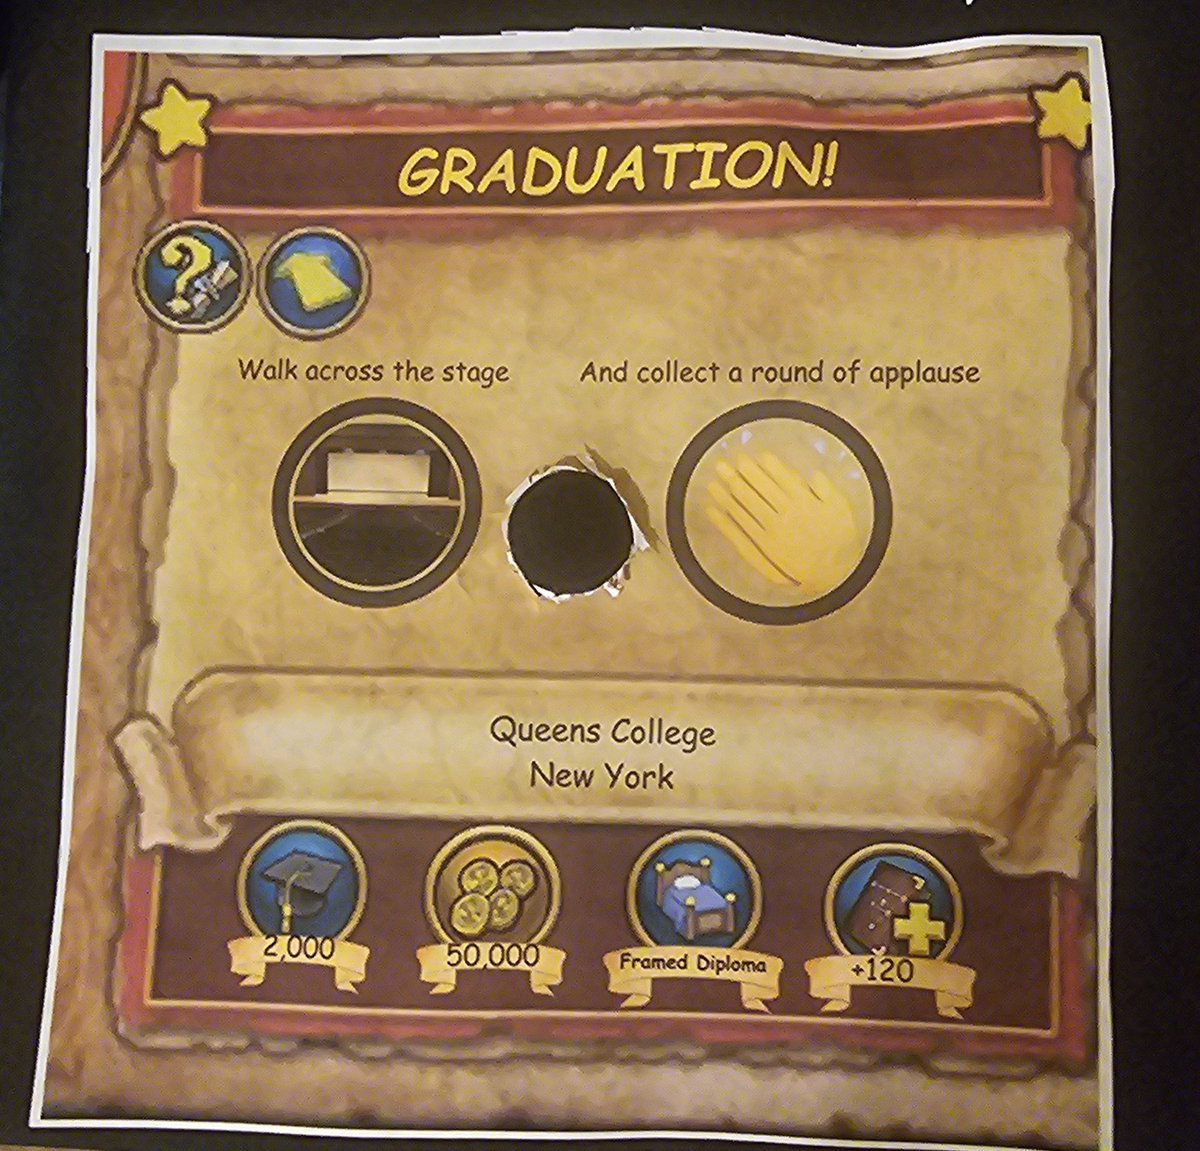 Here is my #wizard101 themed grad cap for my college graduation!